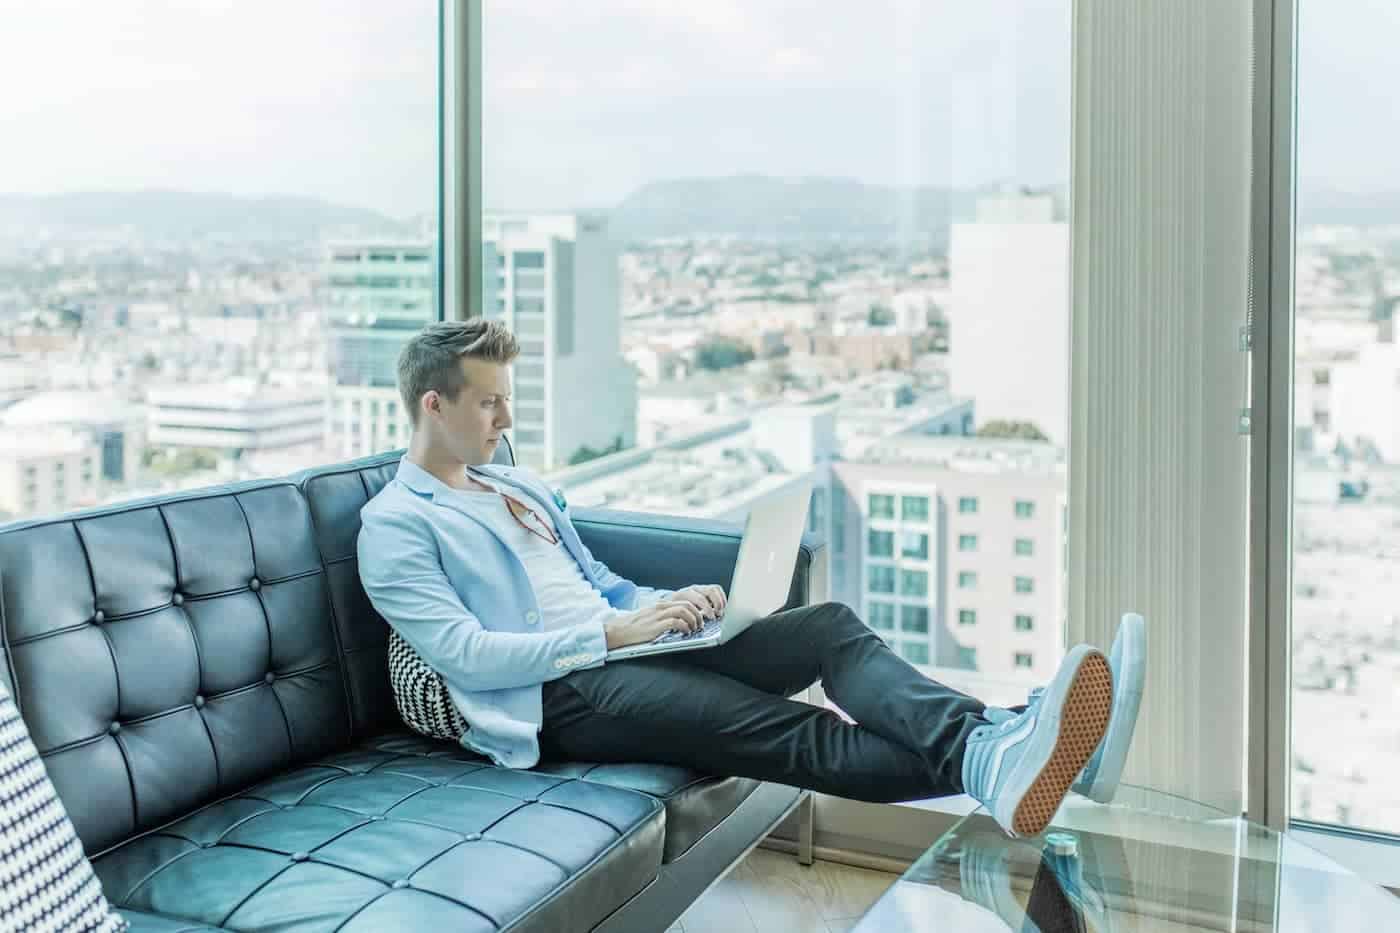 entrepreneur working in an office building overlooking the city